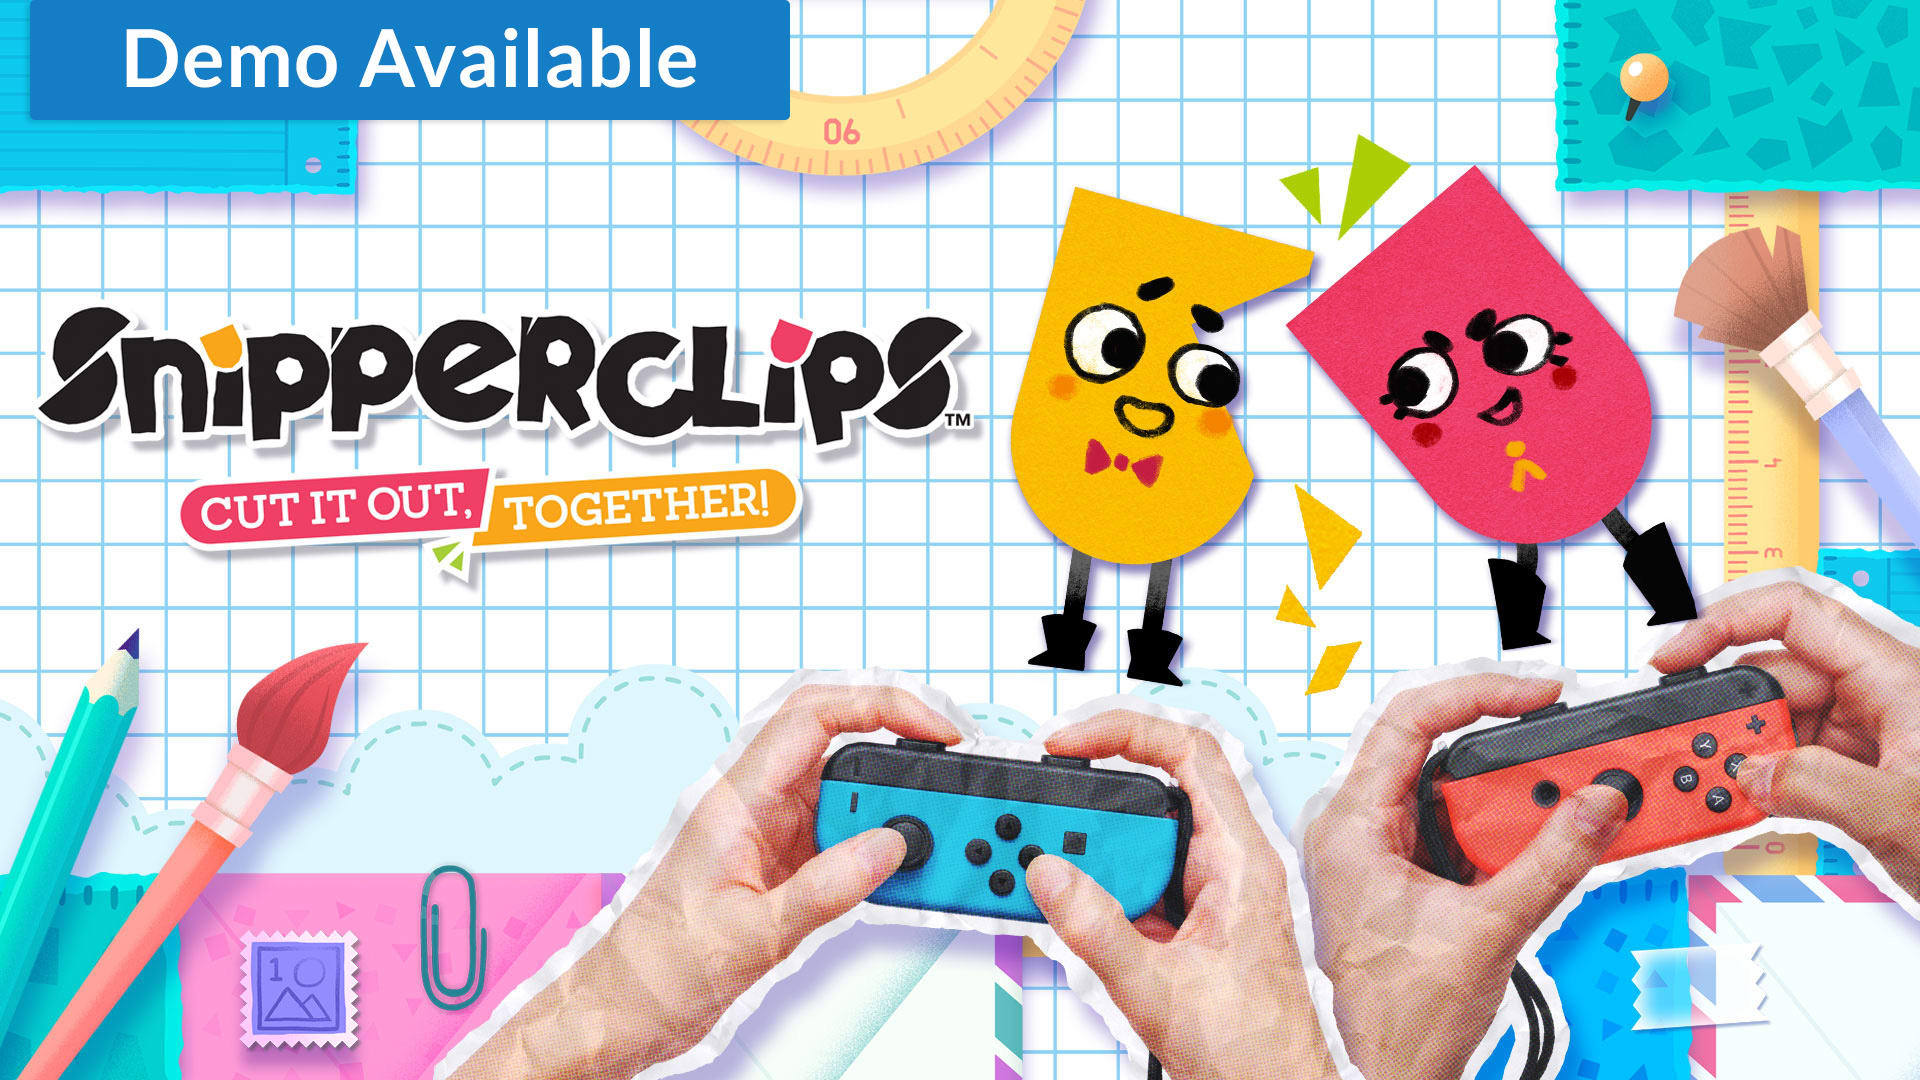 Snipperclips™ – Cut it out, together! 